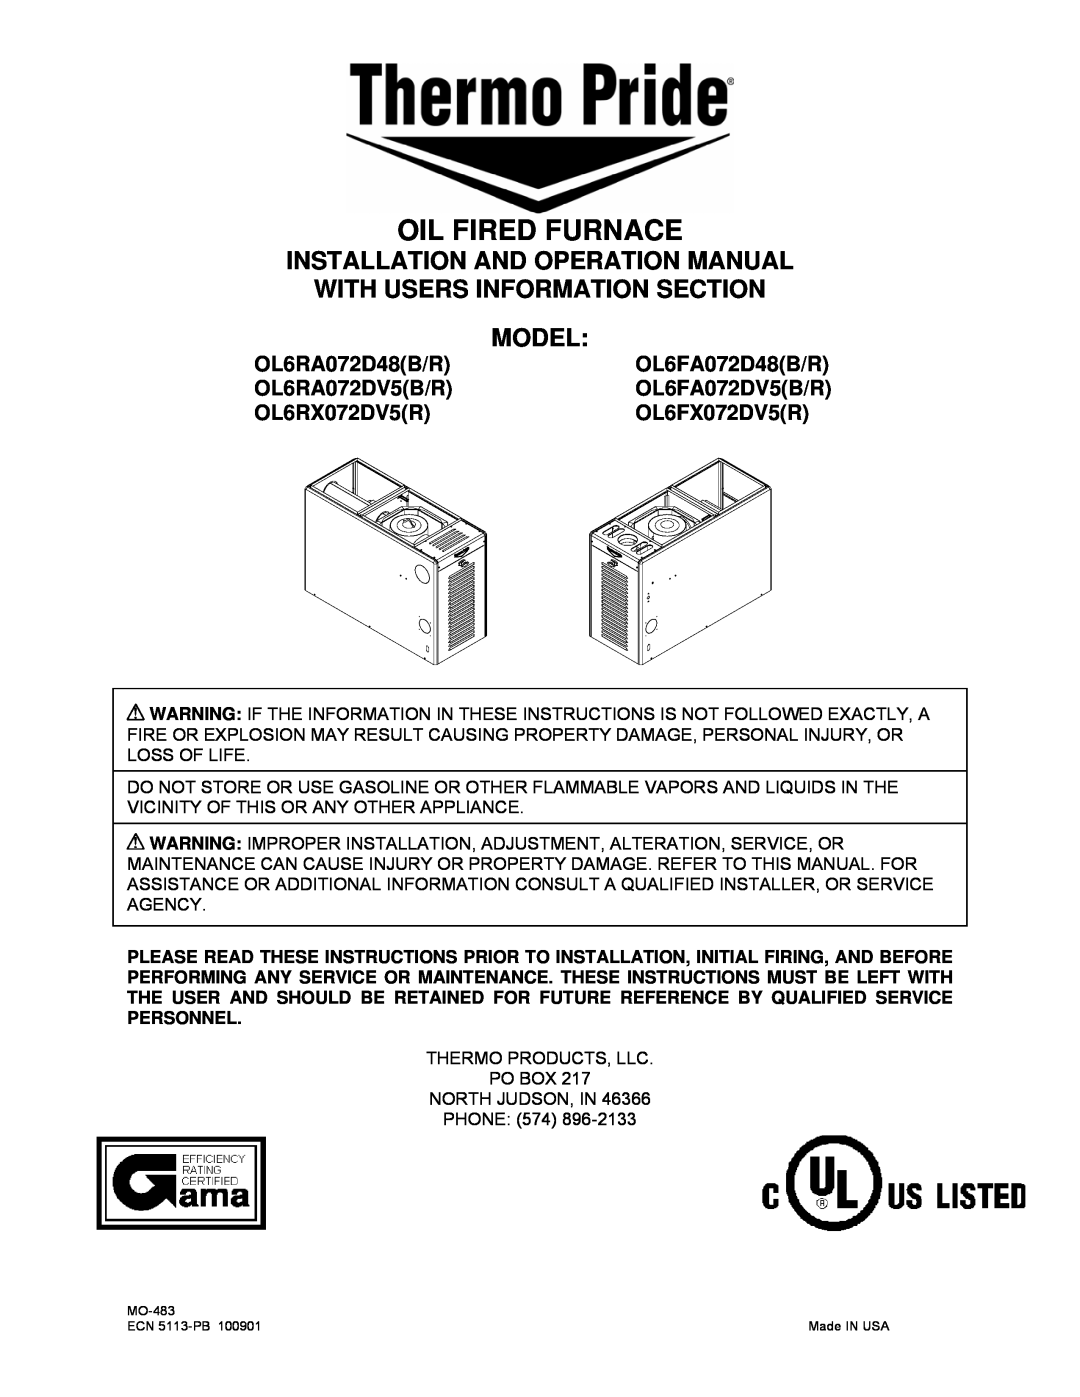 Thermo Products OL6RA072D48(B/R) operation manual OL6RA072D48B/R, OL6FA072D48B/R, OL6RA072DV5B/R, OL6RX072DV5R, Model 